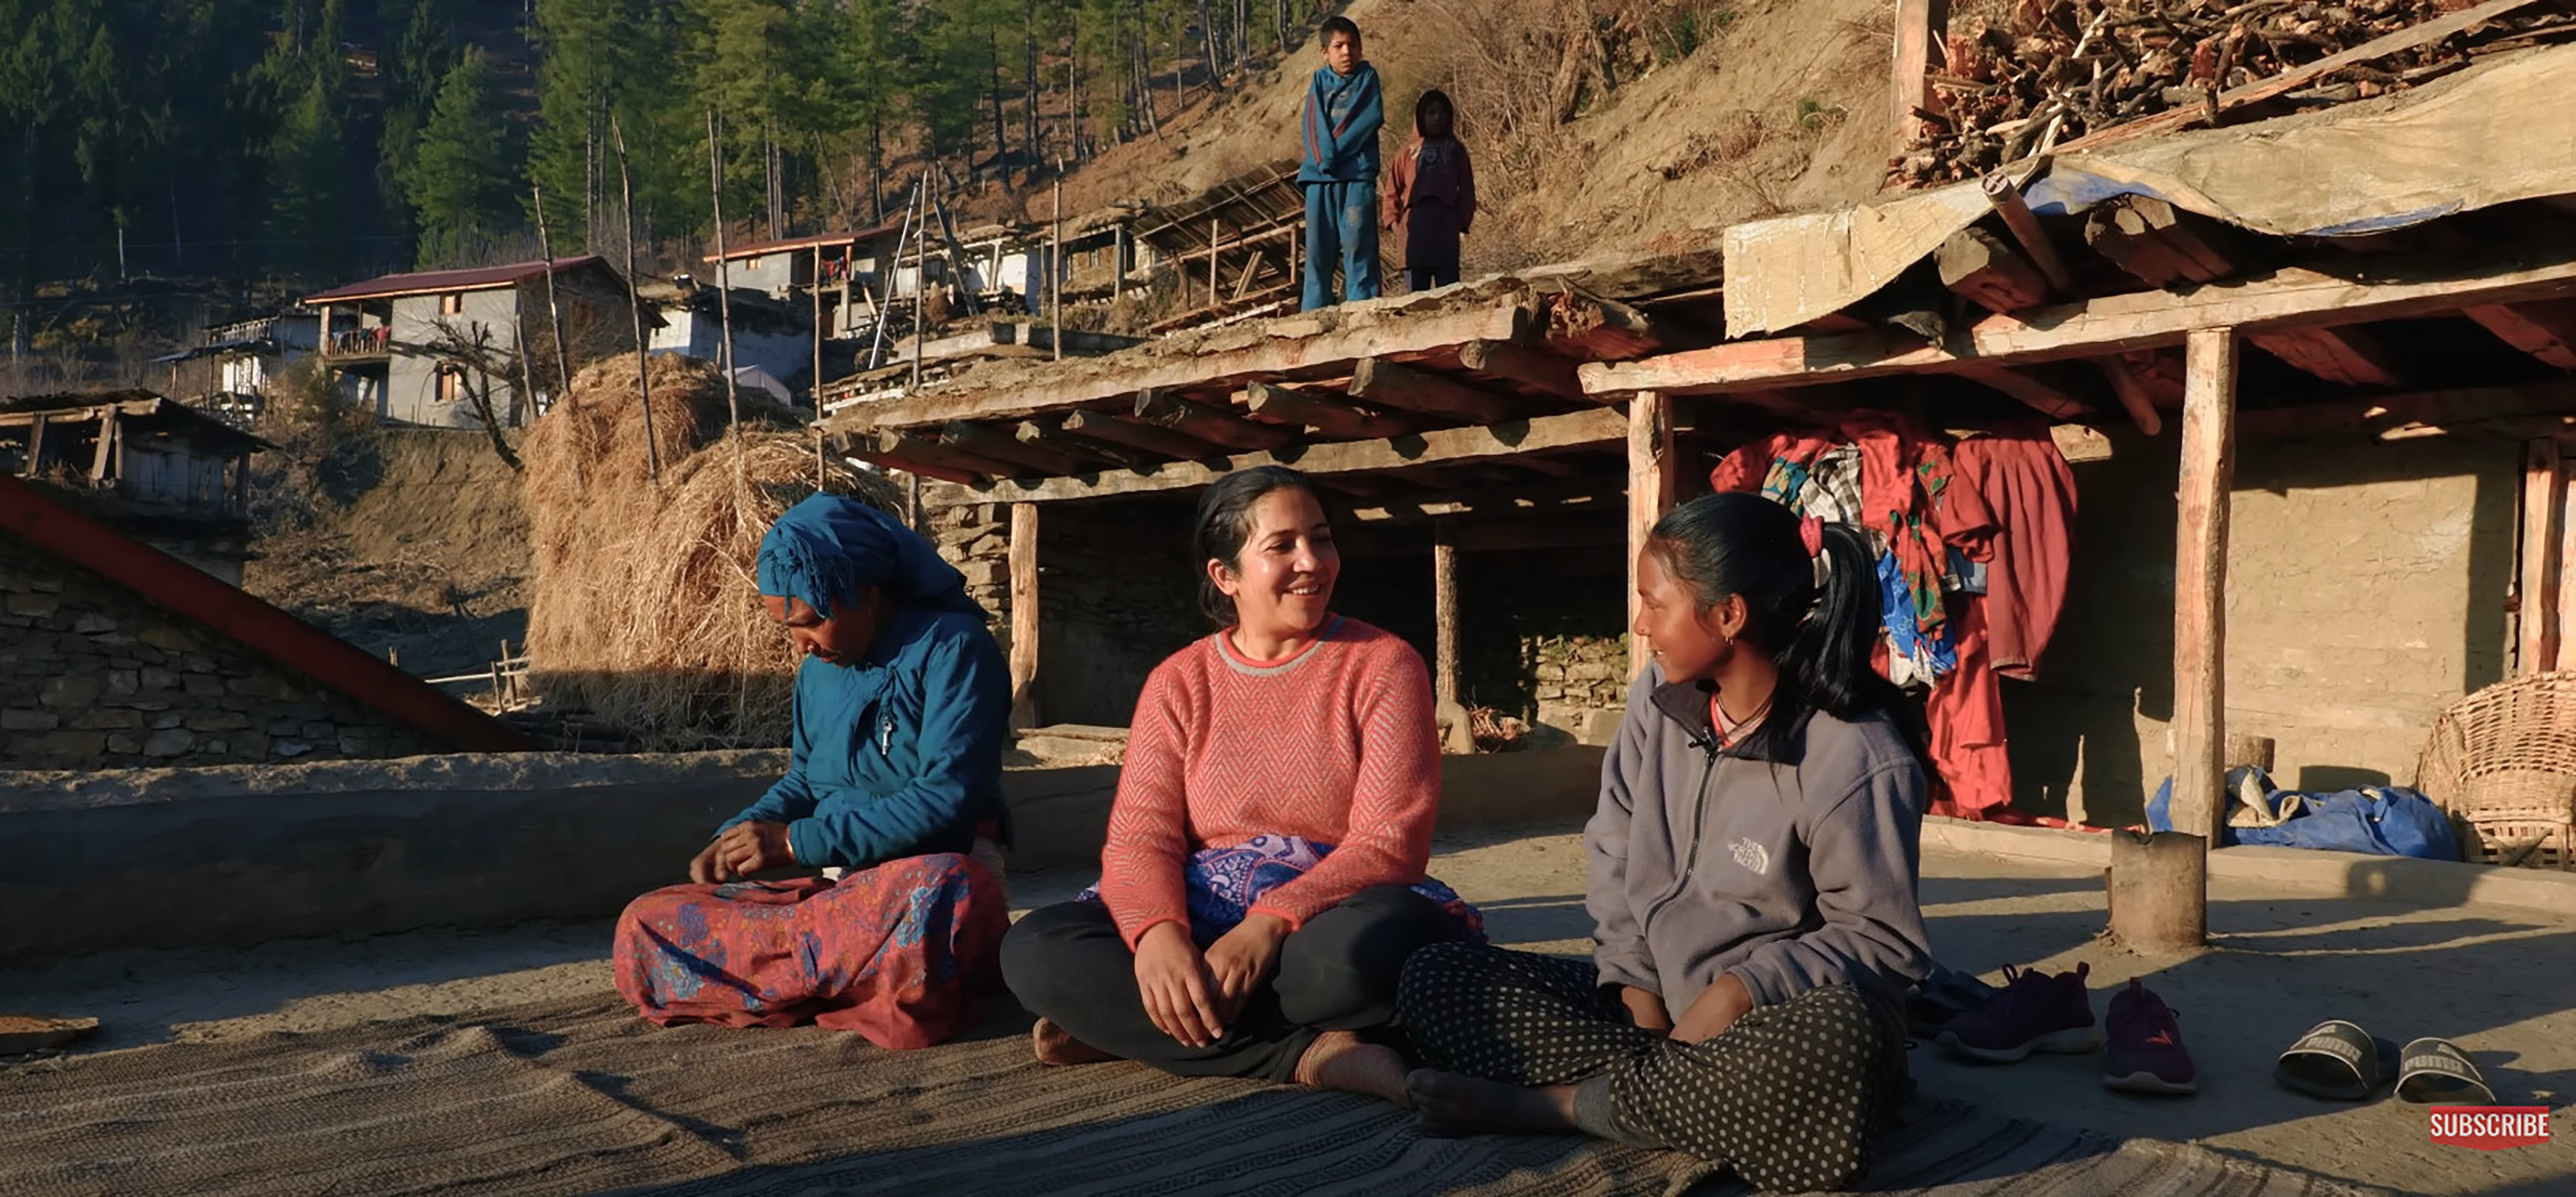 A screenshot from Herne Katha, with host Bidhya Chapagain interviewing locals at a village in the remote Mugu district in Nepal. Photo: Bibek Bhandari